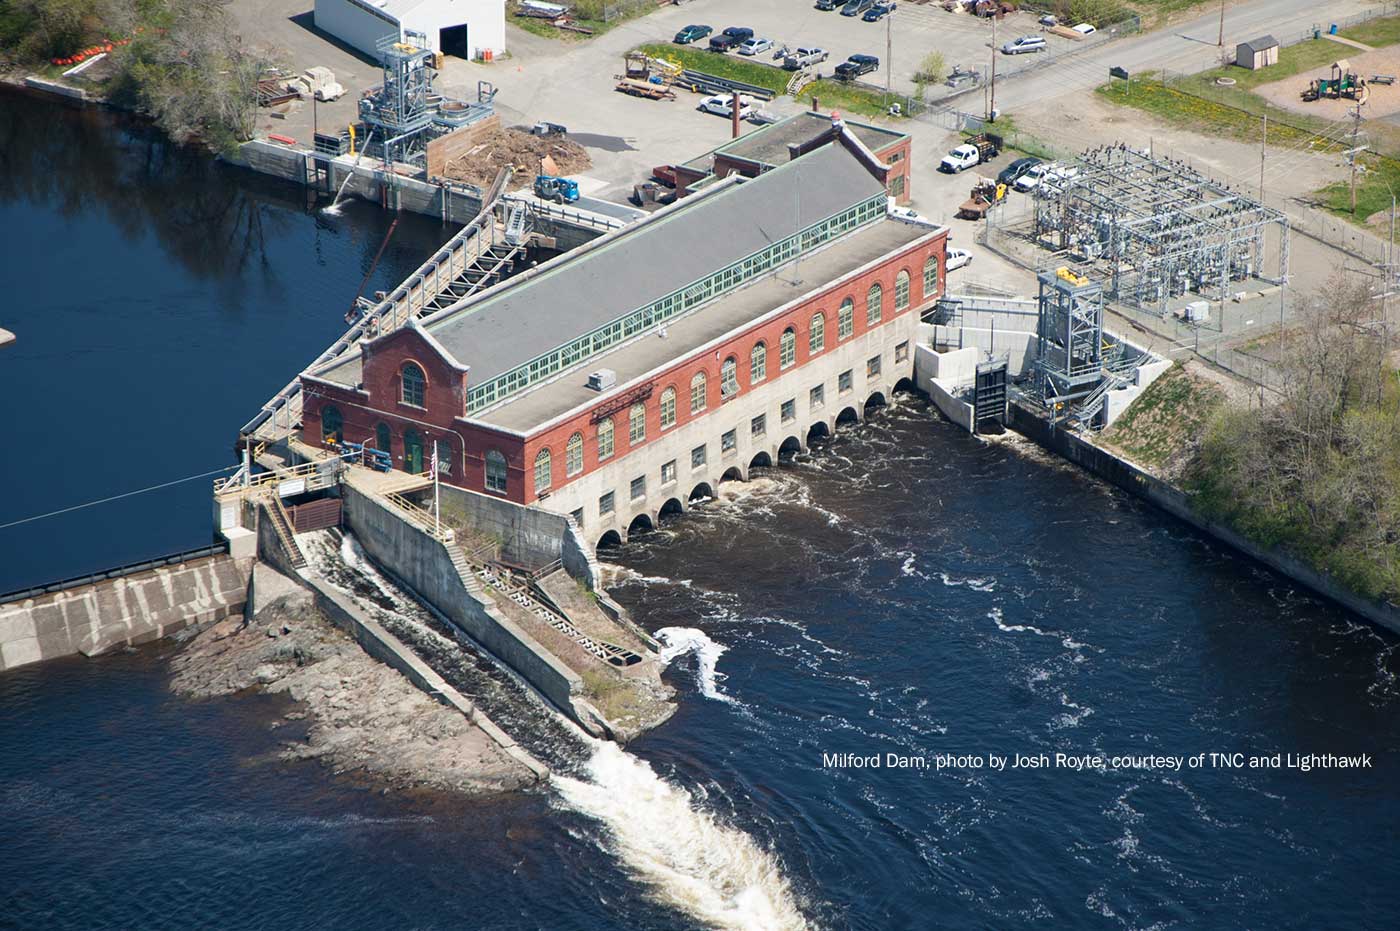 Aerial view of Milford Dam and fish lift